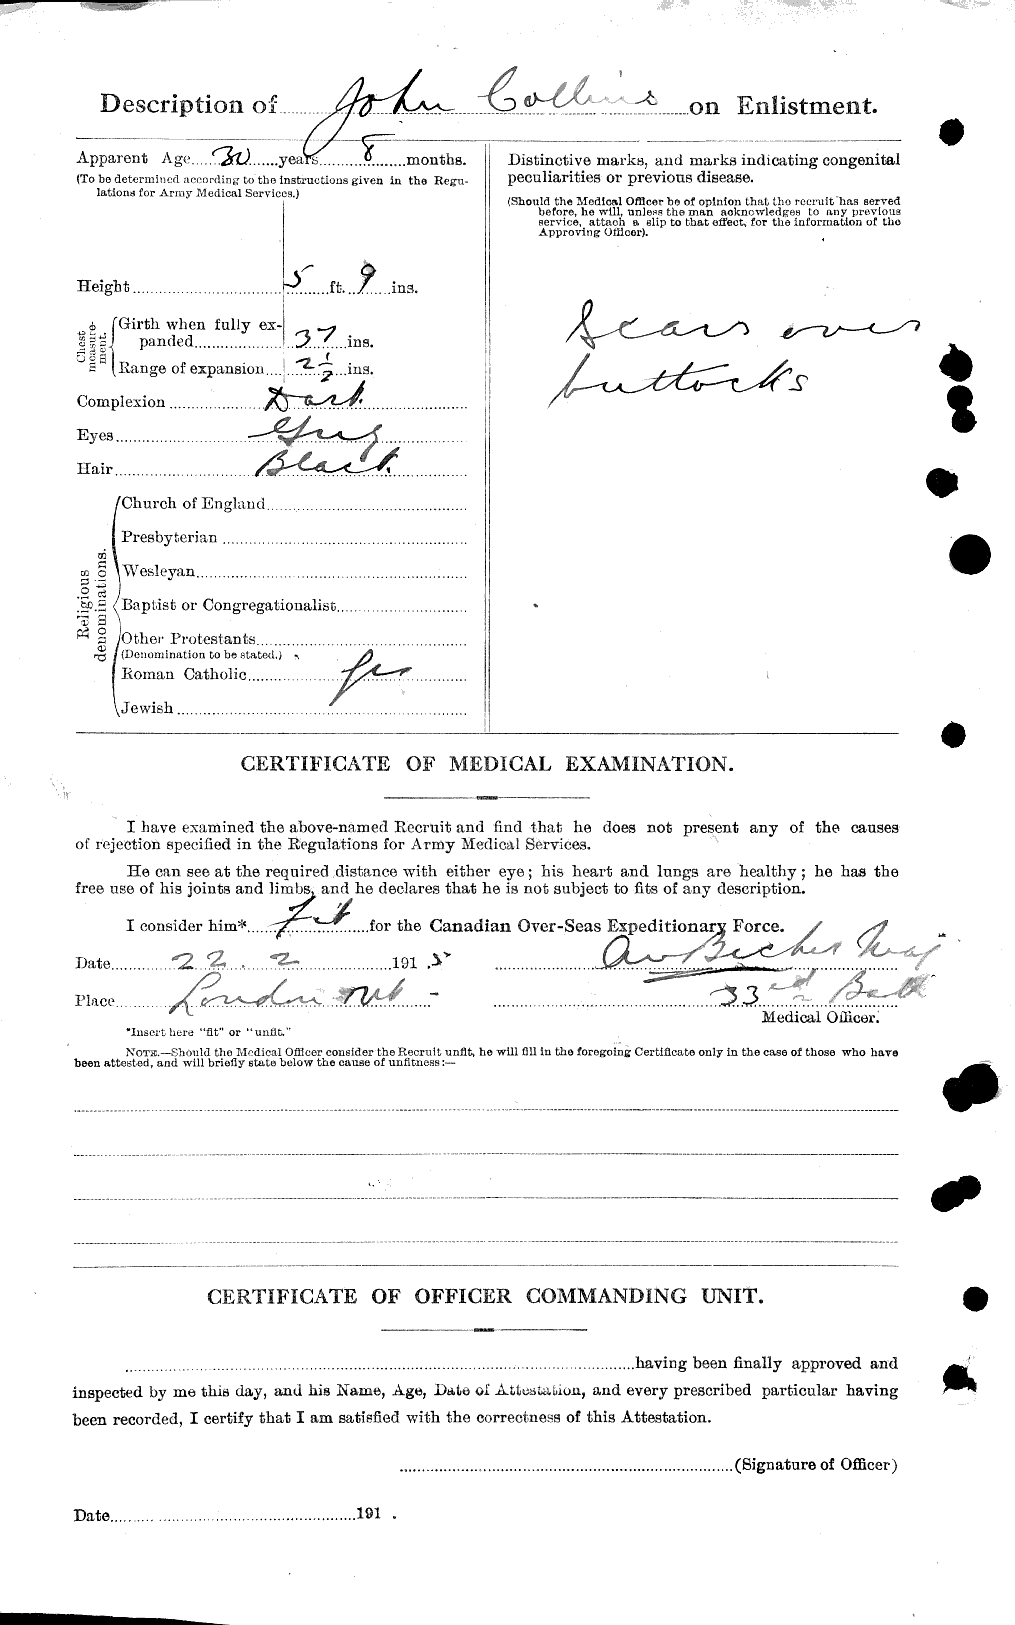 Personnel Records of the First World War - CEF 034378b